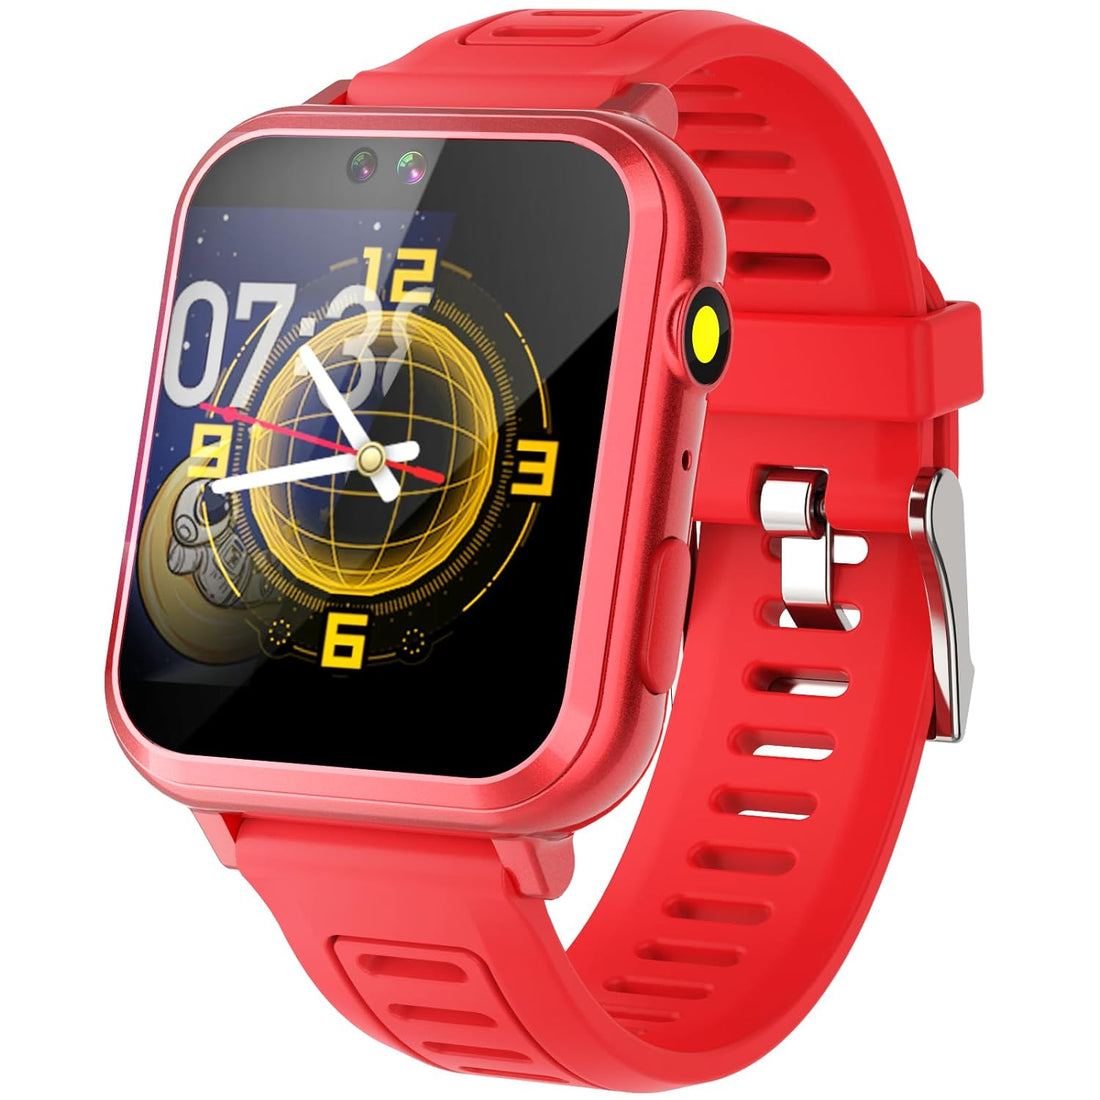 Waterproof Touch Screen Smart Watch with 24 Puzzle Games HD Camera Music Player Pedometer Alarm Clock and Selfie Cam - Great Learning Toy for Kids (Red)